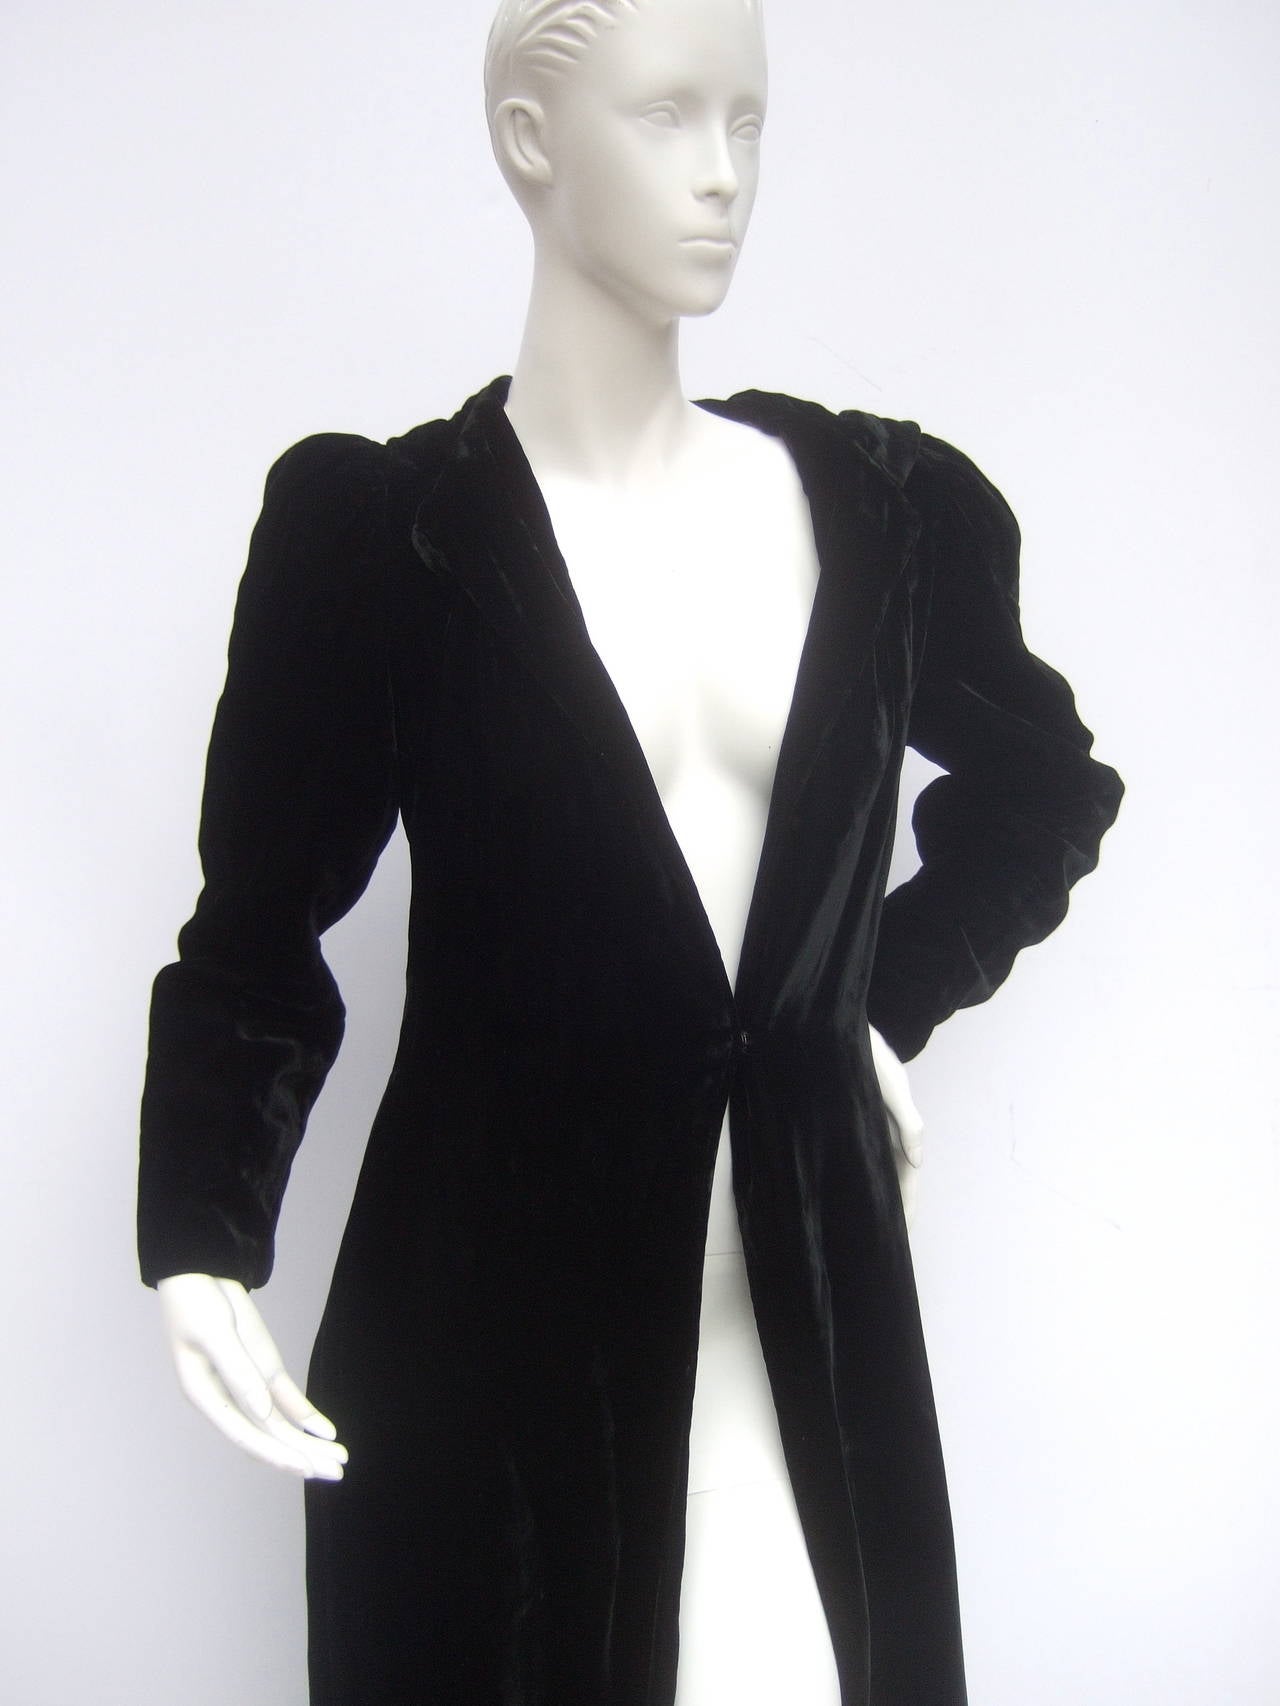 Dramatic black silk velvet hooded evening coat c 1960
The luxurious plush black velvet opera style coat makes a stunning garment 
The coat secures with a single large velvet covered button at the neckline 
Designed with one snap button at the